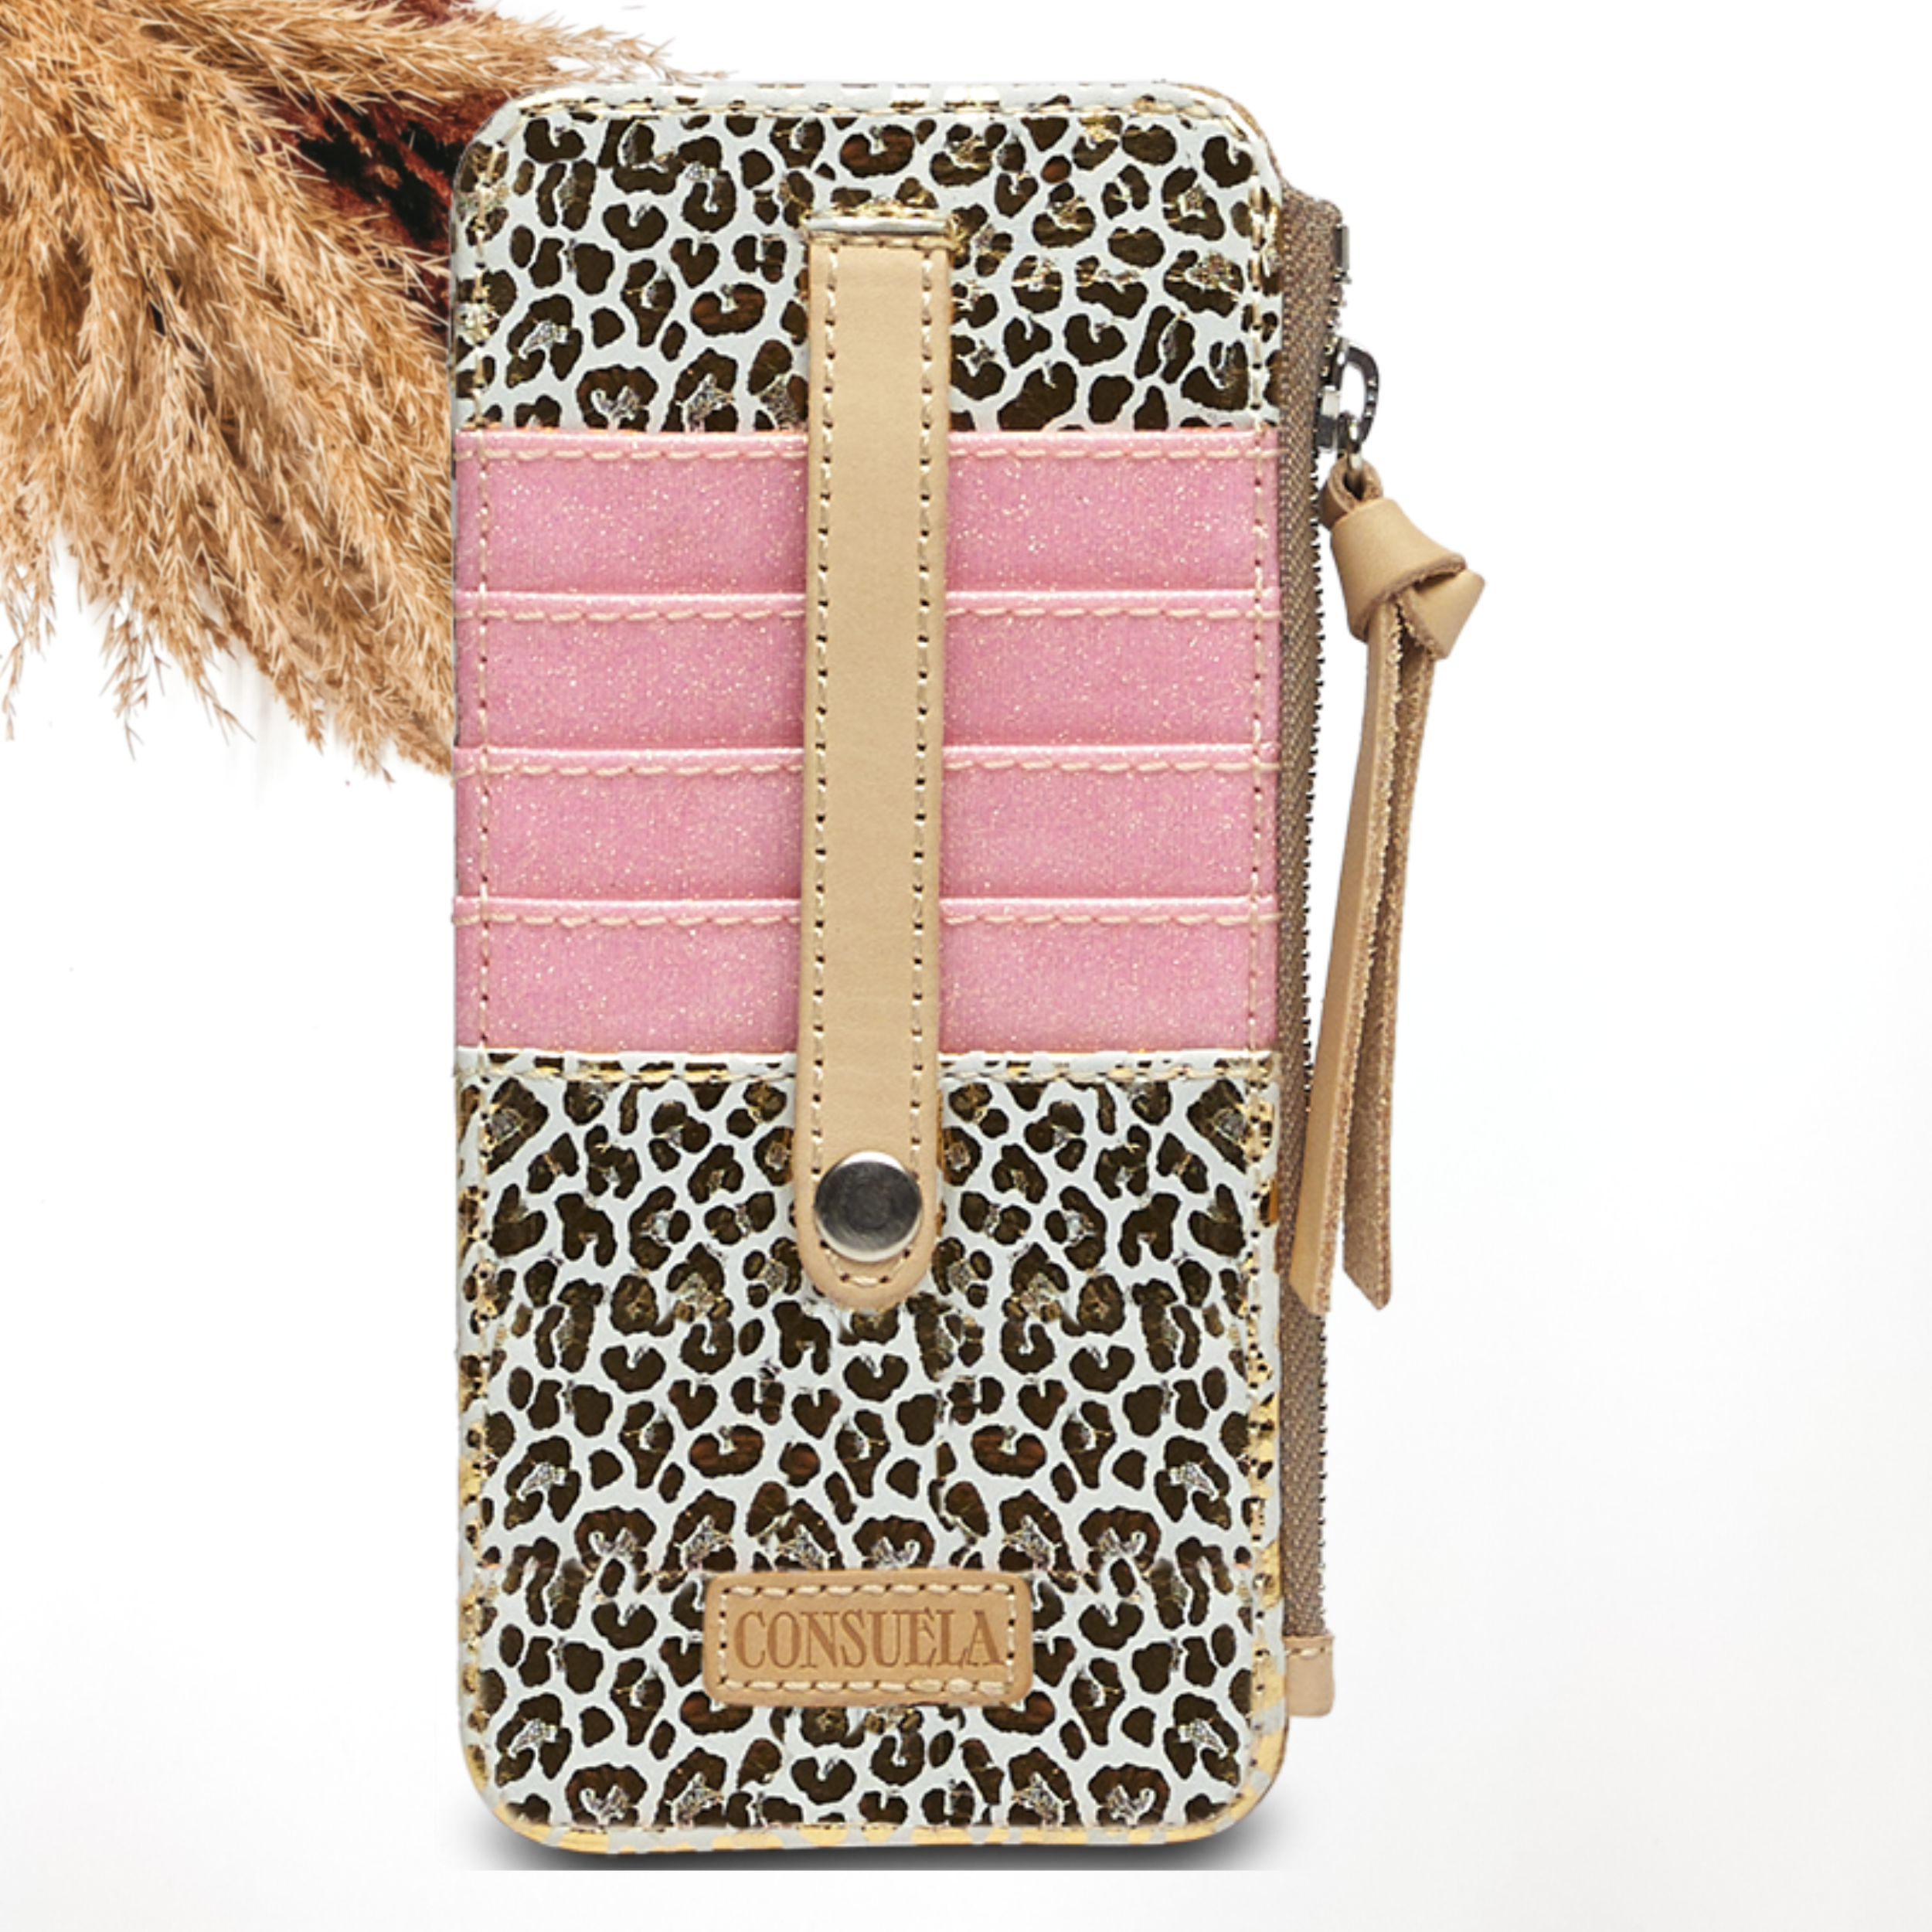 Pictured on a white background is a card organizer with a light tan leather zipper pull on the side and a button closure over the pockets. This card organizer is white with a metallic gold leopard print design with the pockets in a pink glitter design. 